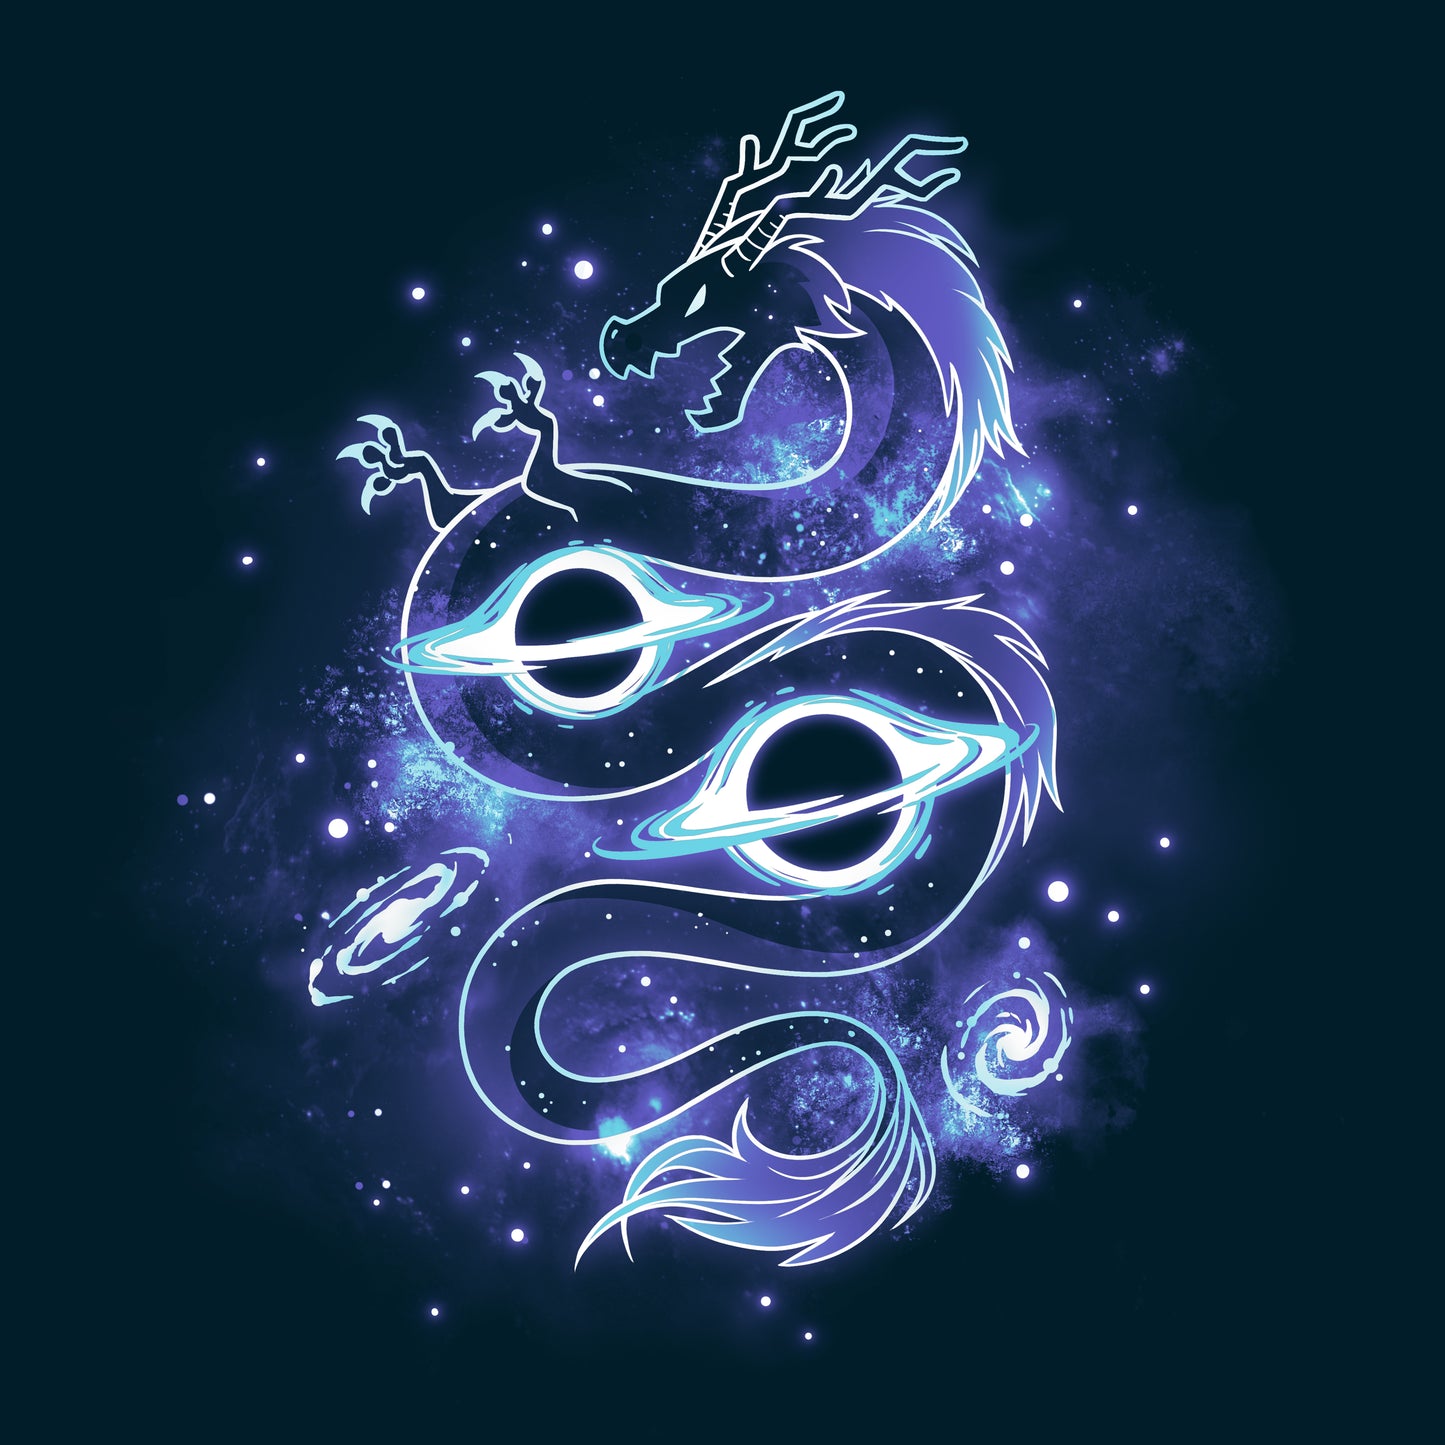 This Outer Space Dragon T-shirt, by TeeTurtle, features a blue dragon with a blue eye on a dark background, crafted from Ringspun Cotton fabric.